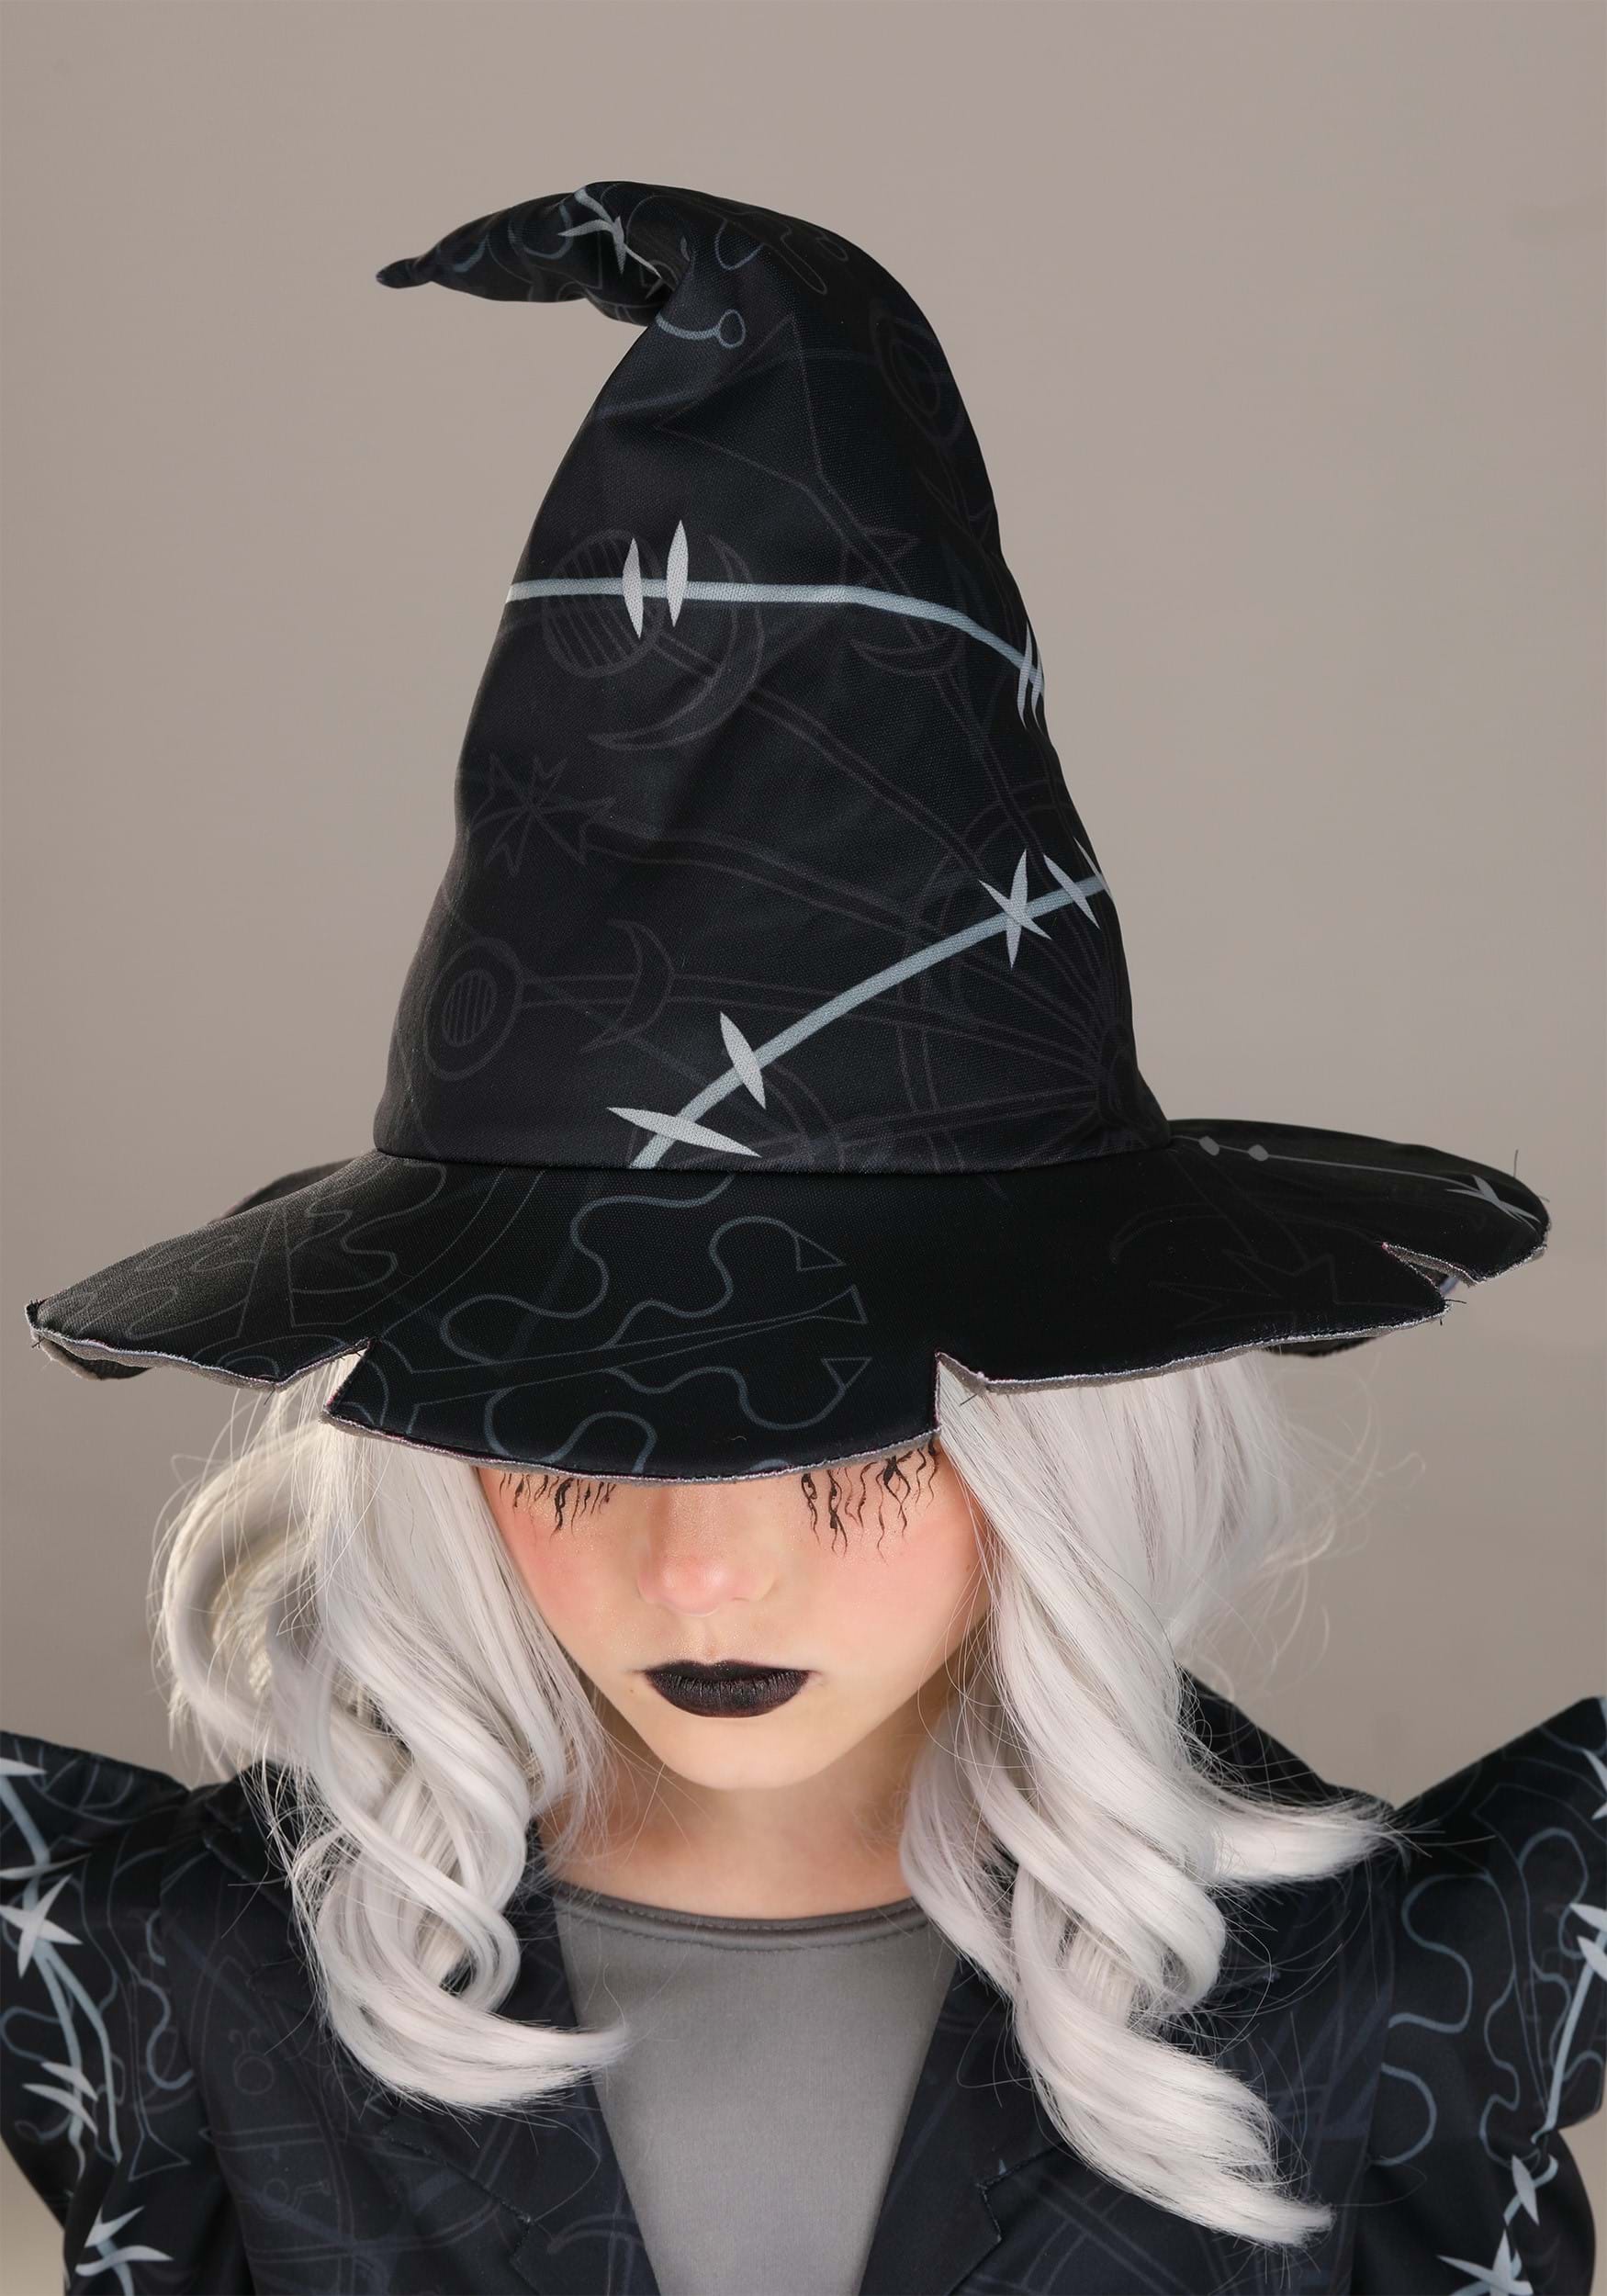 https://images.halloweencostumes.com/products/78275/2-1-259557/girls-gothic-stitch-witch-costume-alt-2.jpg